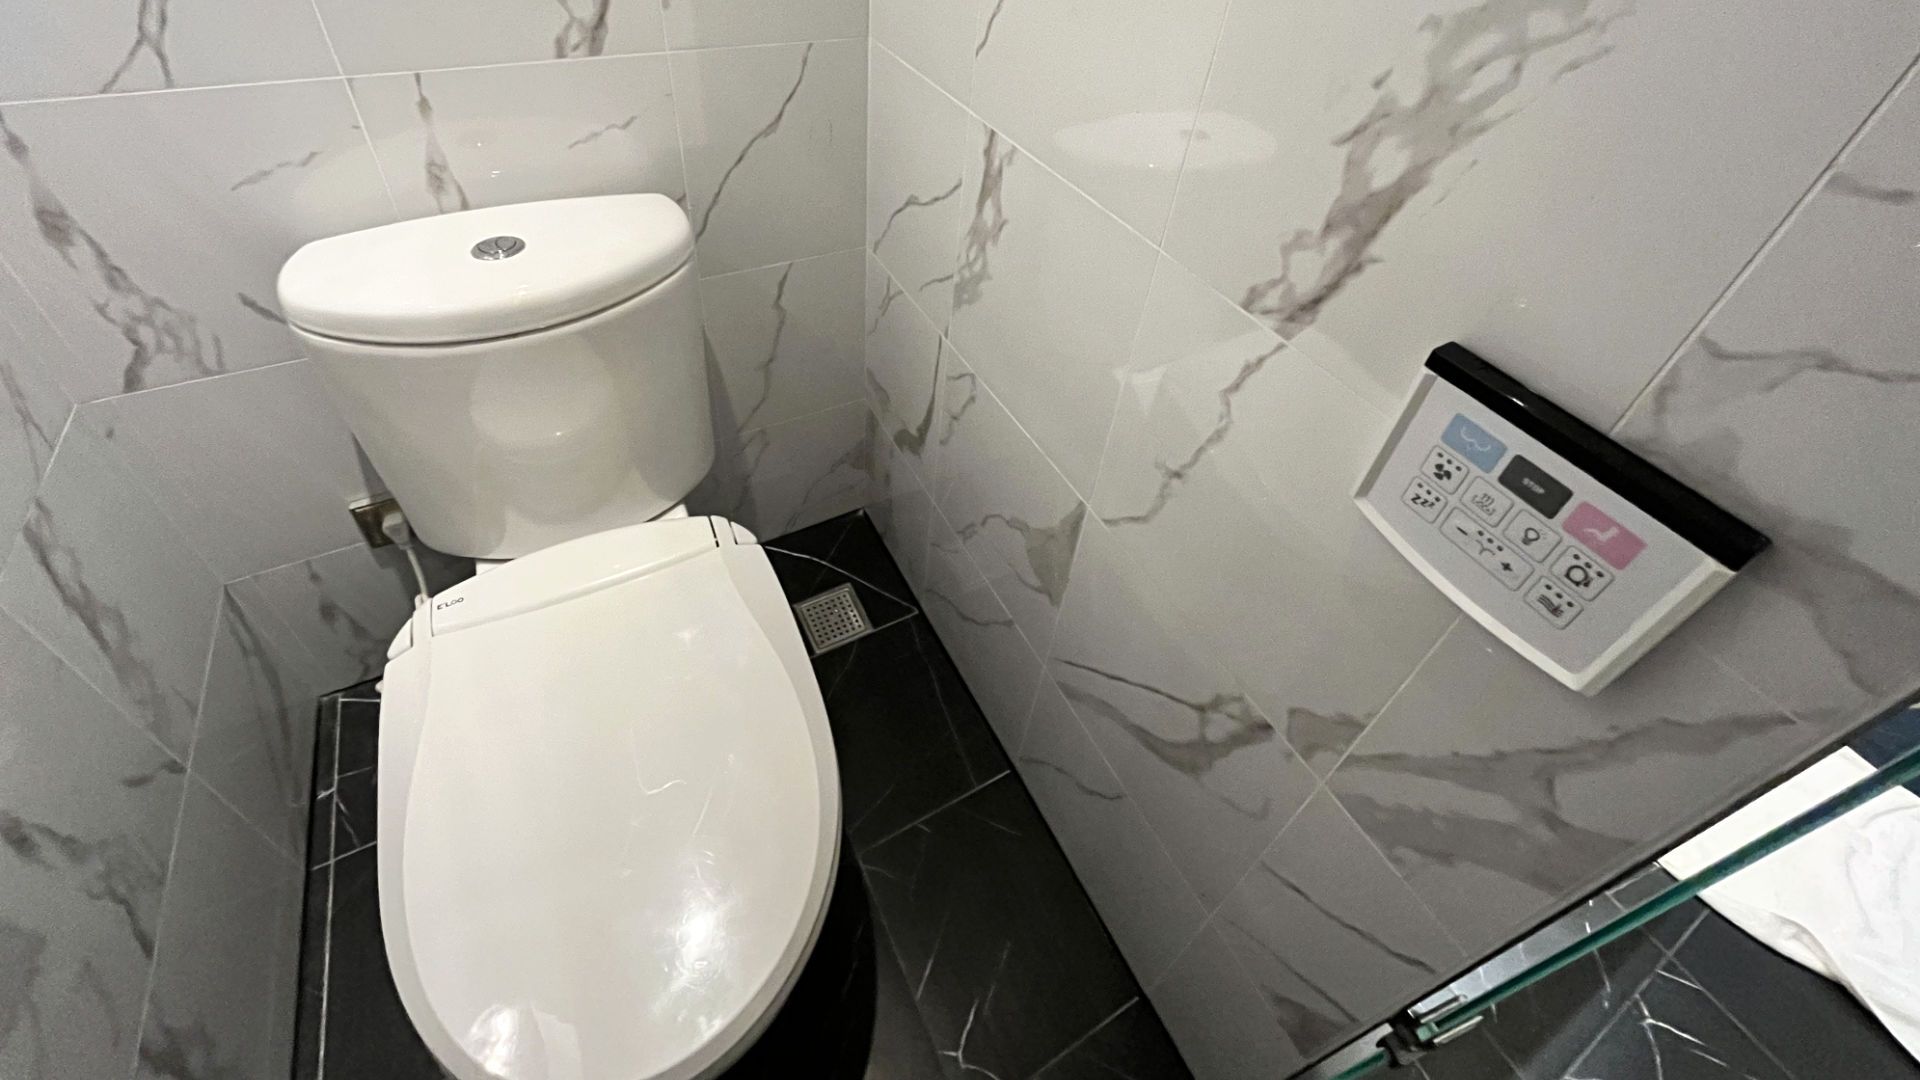 A toilet next to a wall-mounted remote control panel.